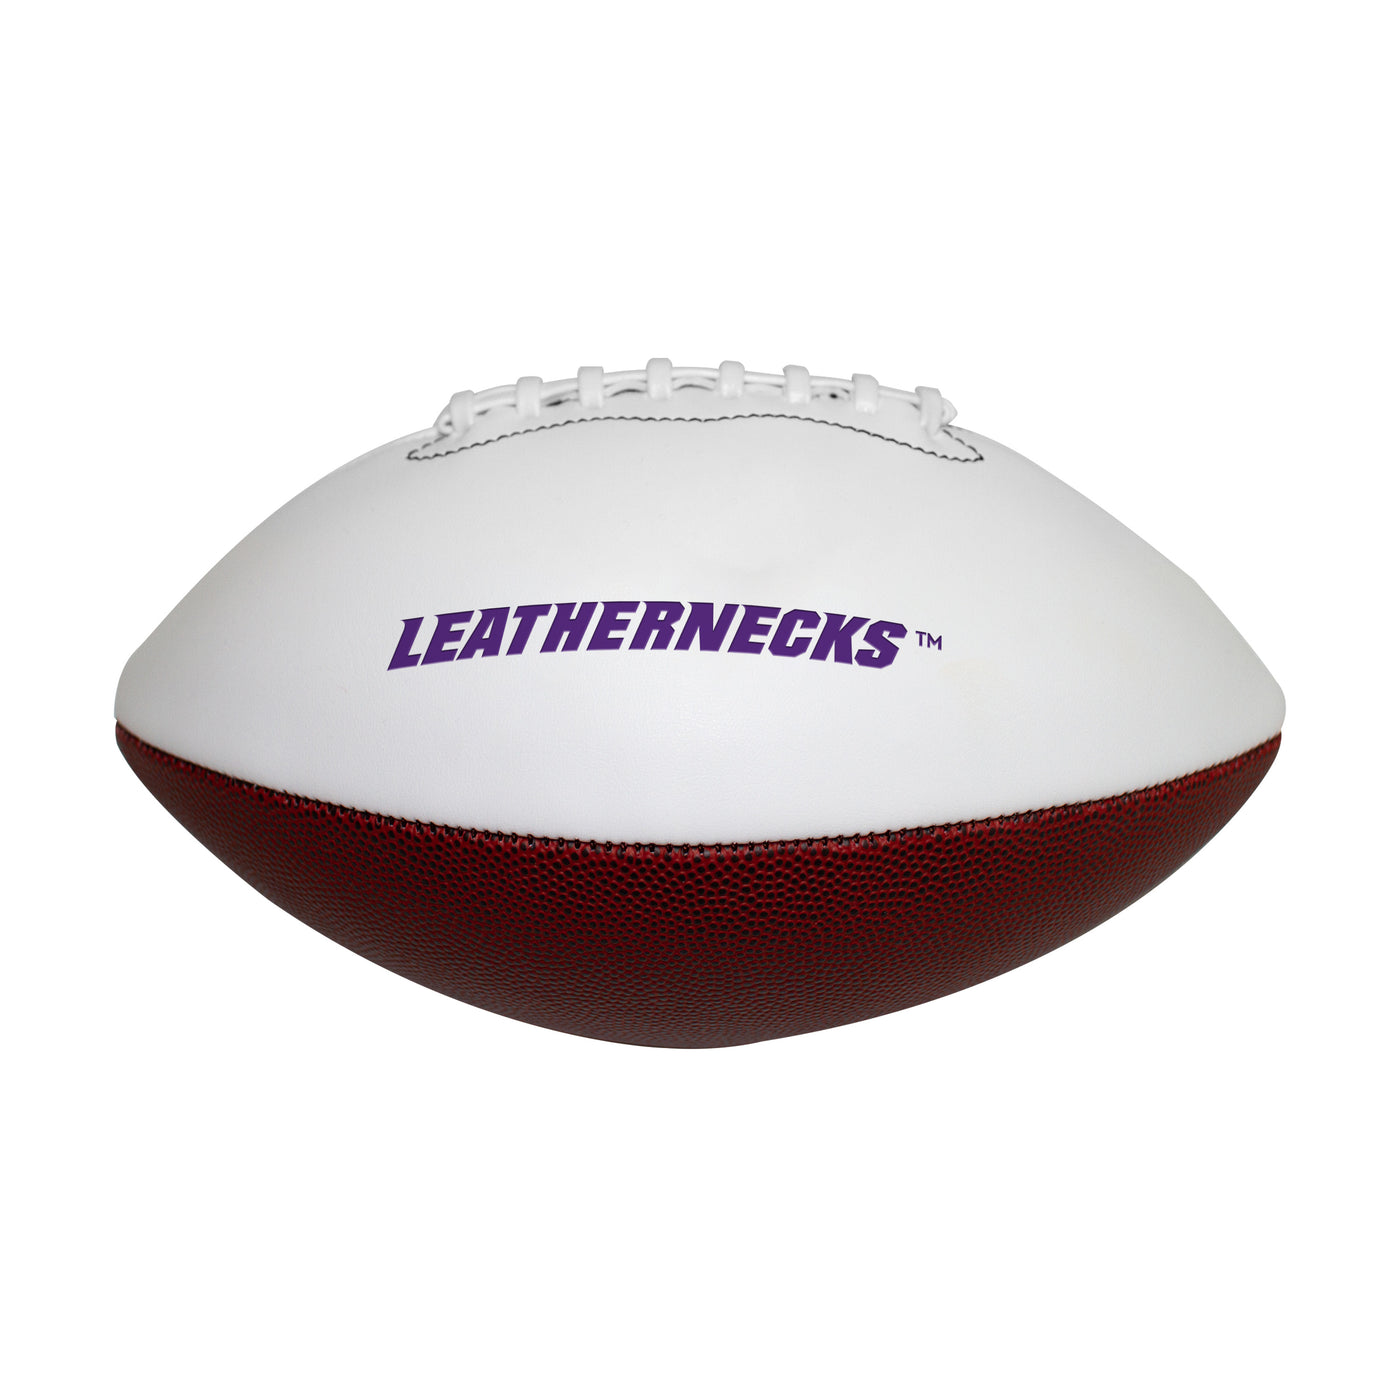 Western Illinois Official-Size Autograph Football